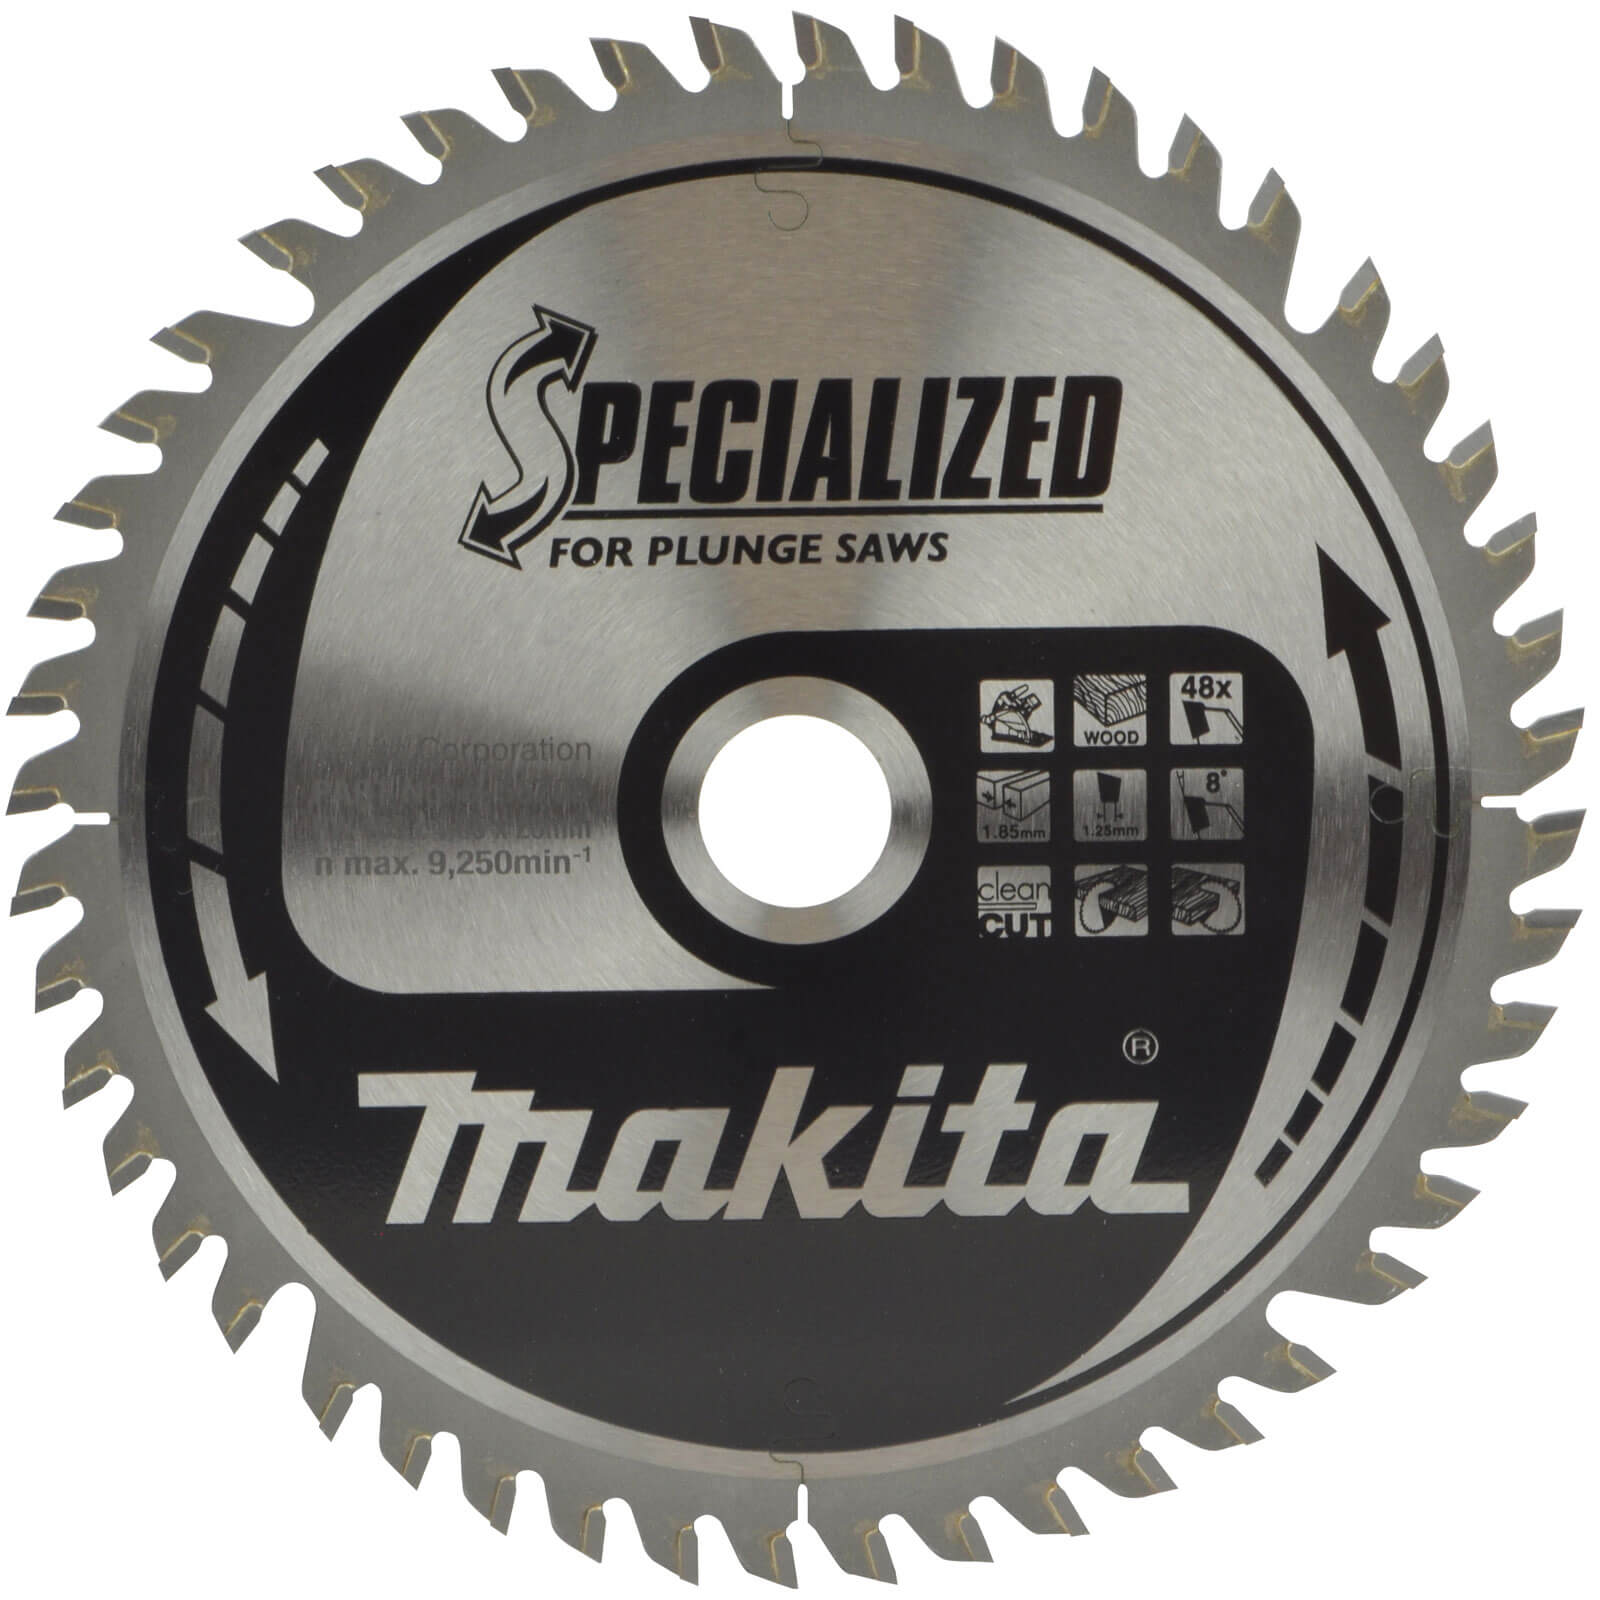 Image of Makita SPECIALIZED Plunge Saw Wood Cutting Saw Blade 165mm 48T 20mm